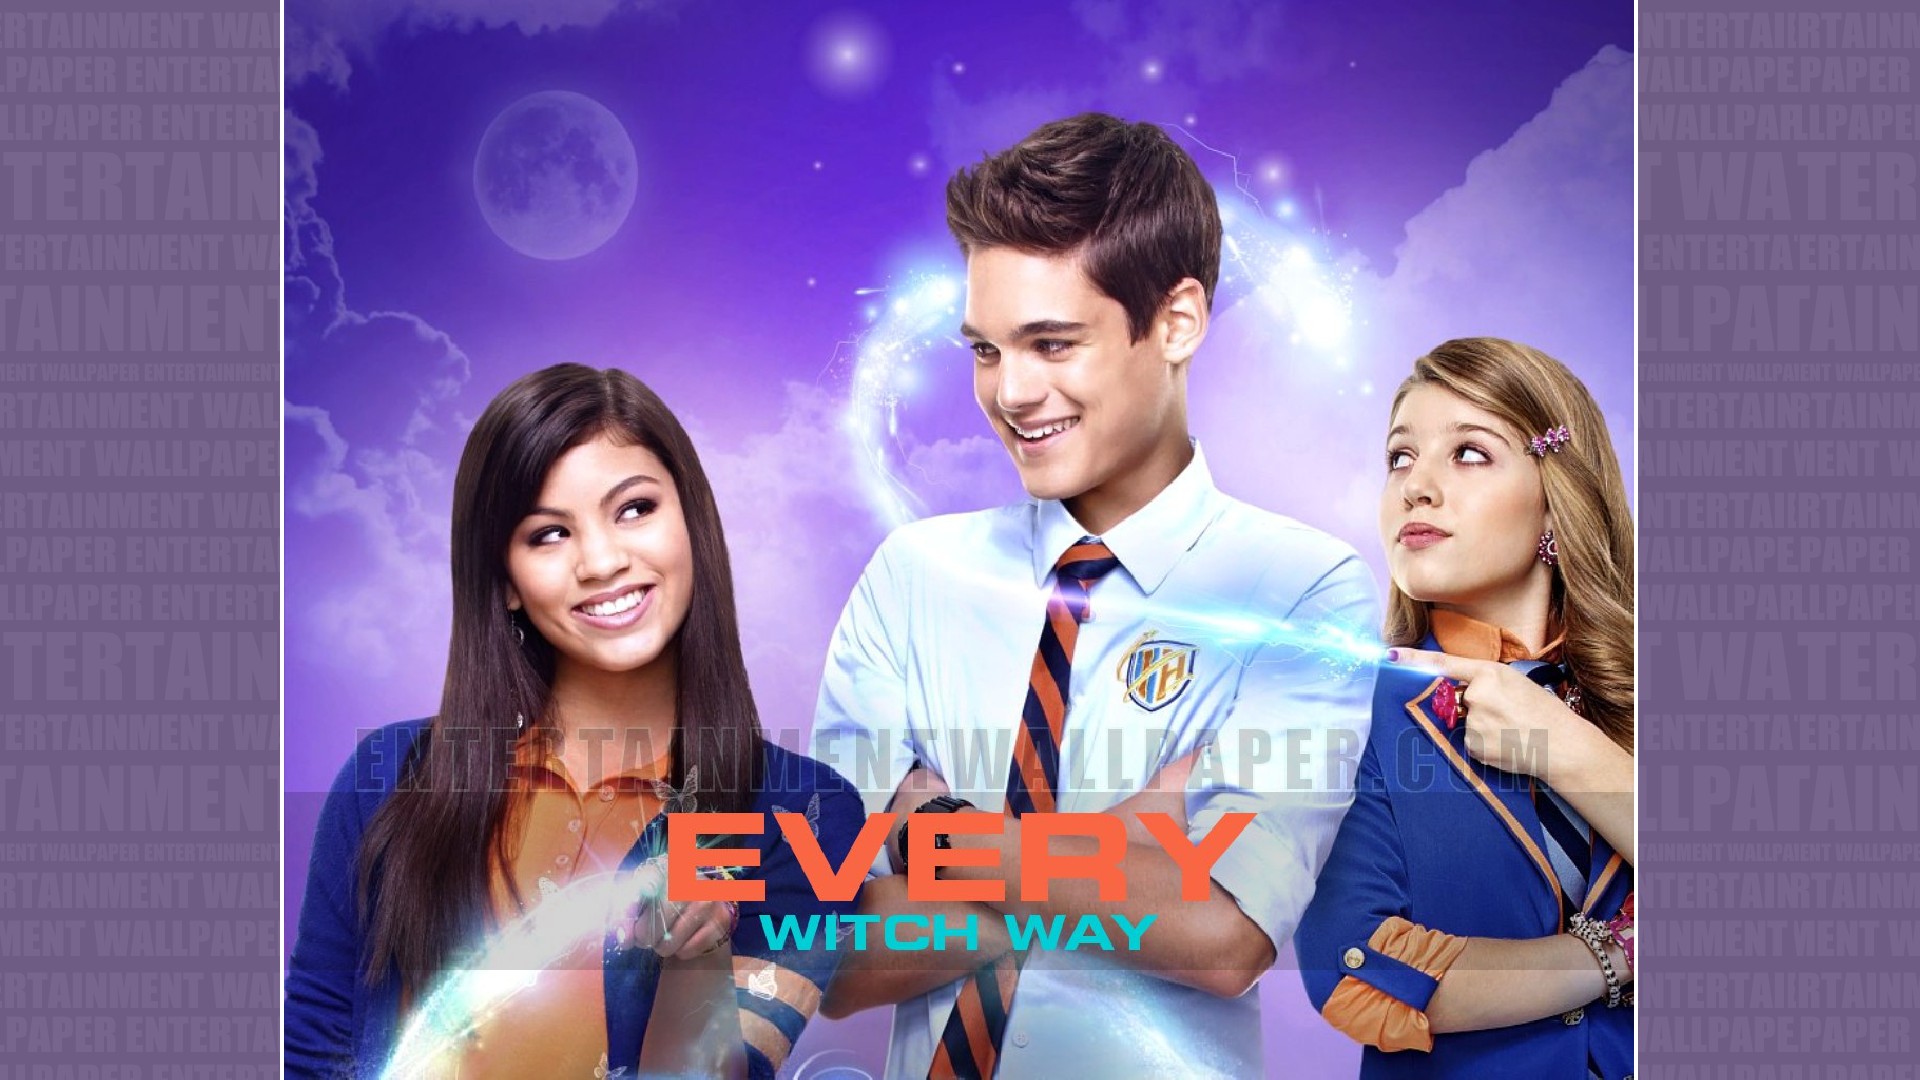 Every Witch Way Wallpaper Size More